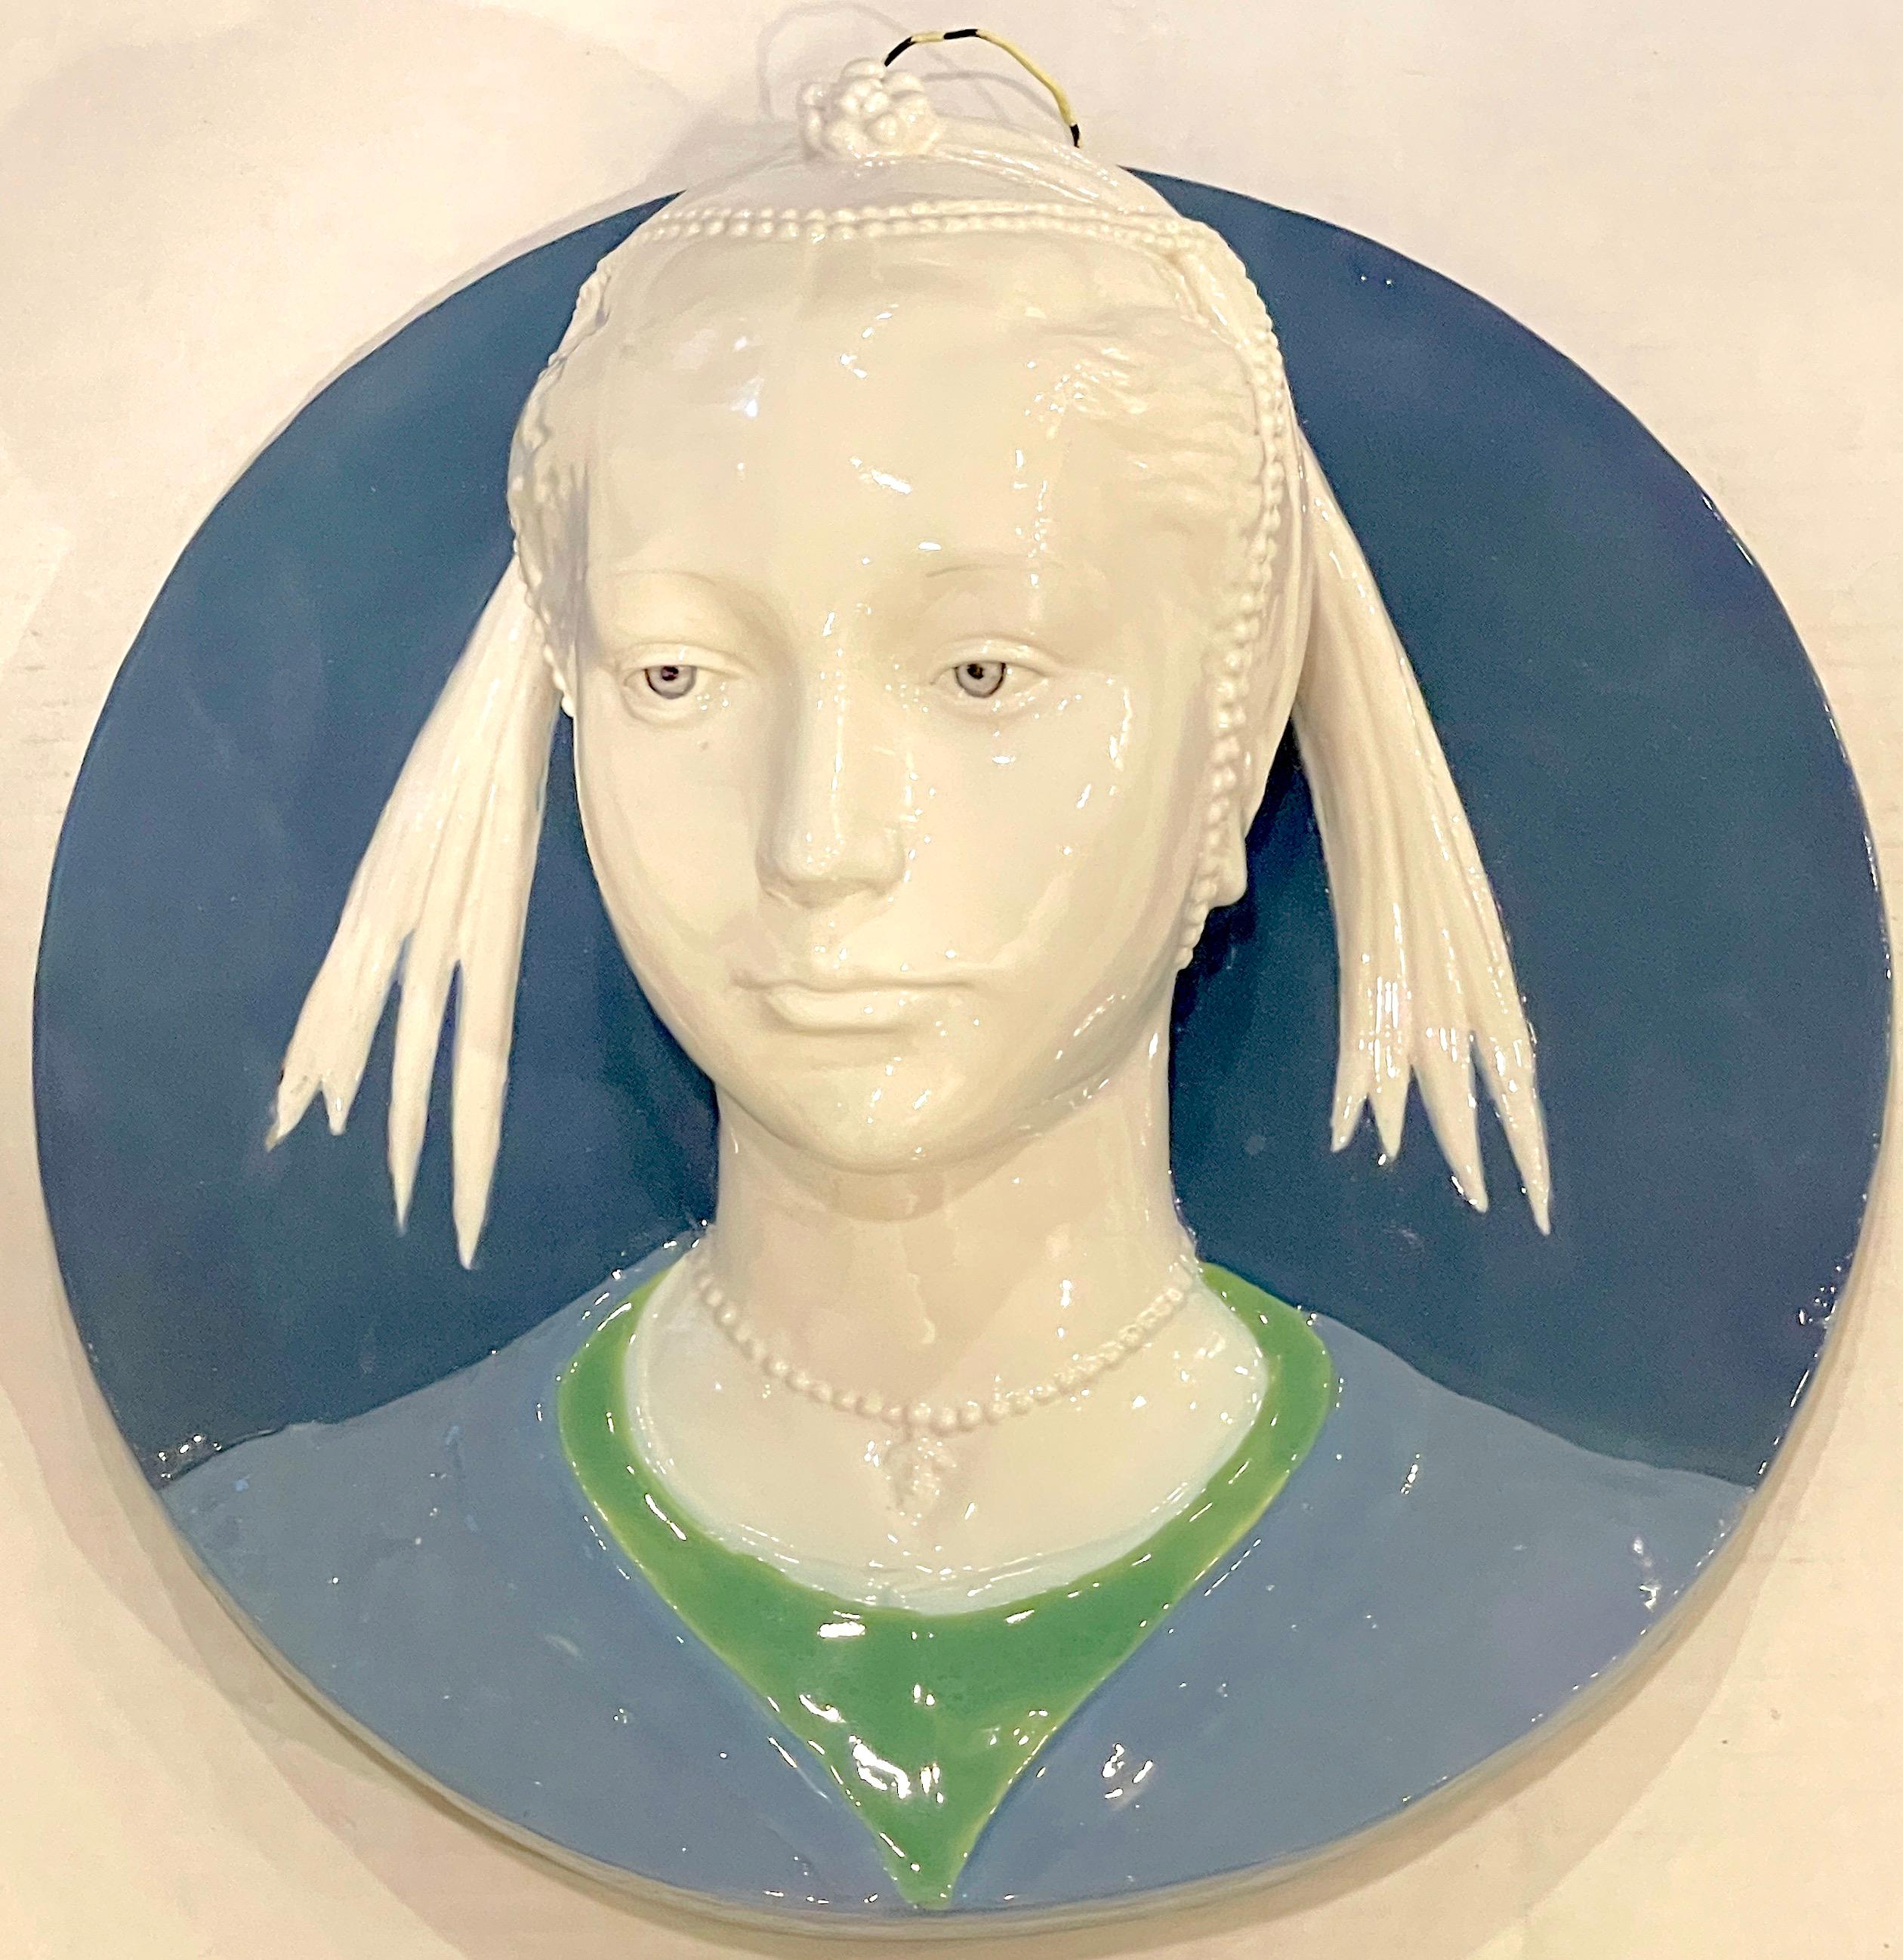 Della Robbia style sculpted portrait plaque of Jeweled Maiden, by Cantagalli
An impressive late 19th century example, subtly detailed, three dimensional circular portrait.

